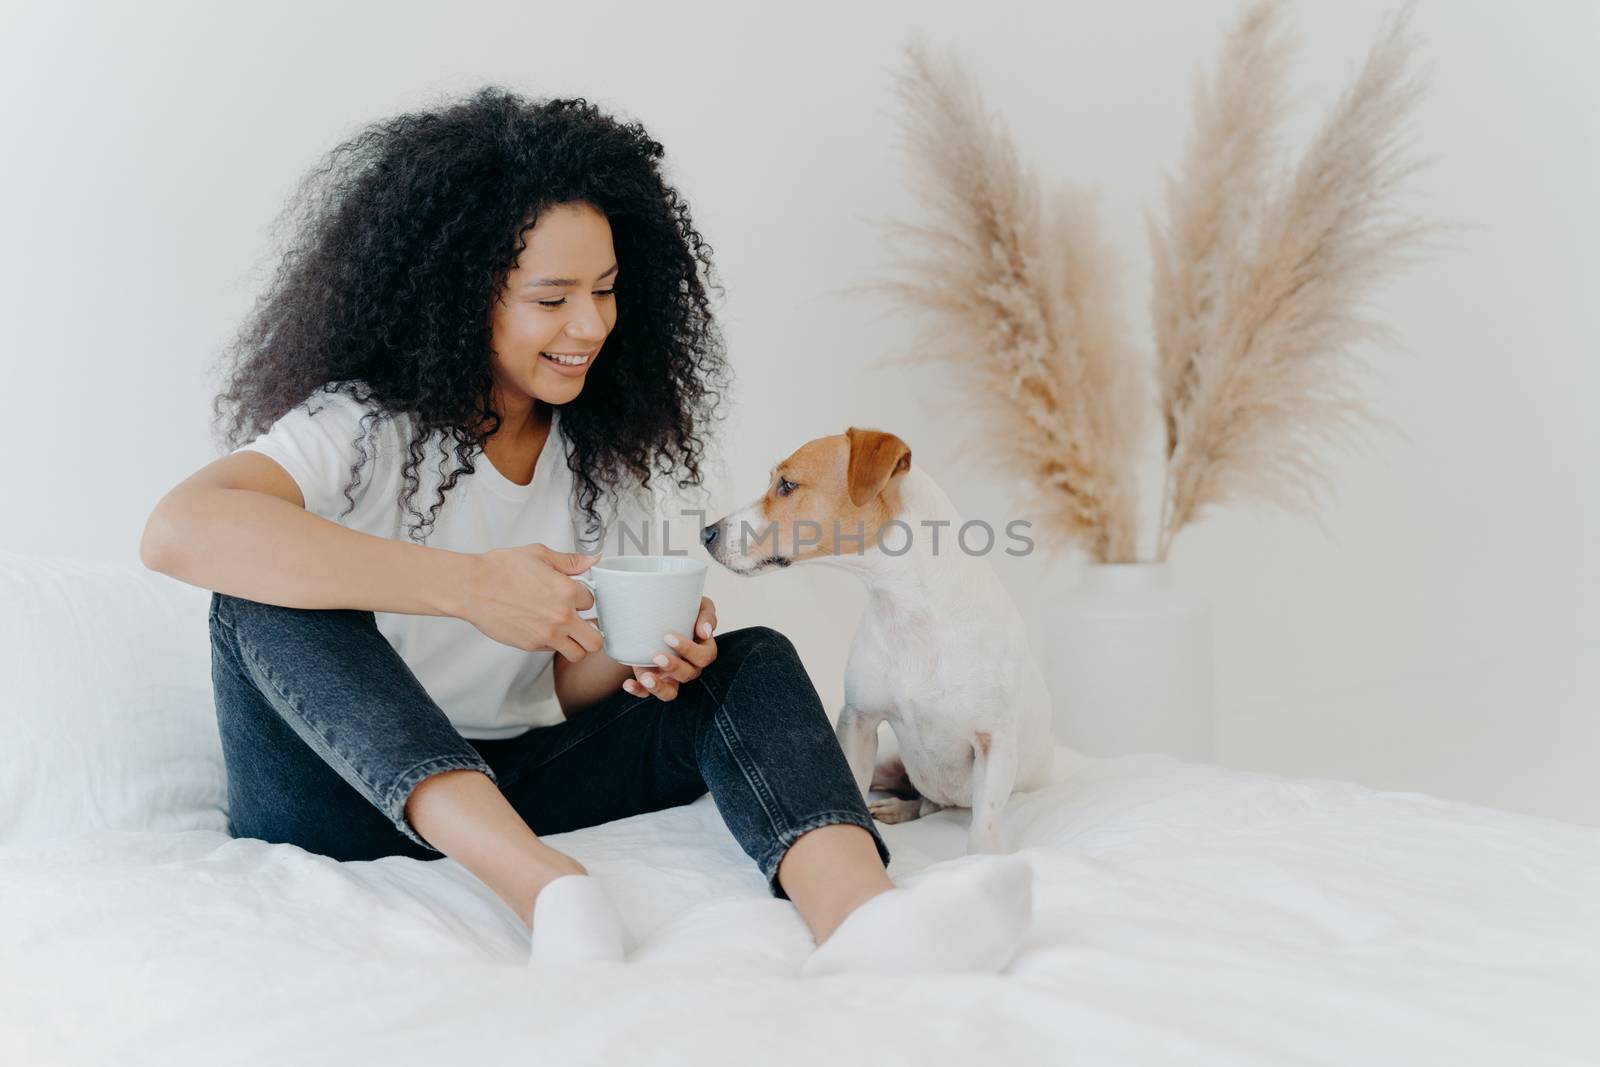 Horizontal shot of happy Afro American woman spends leisure time with dog, feels comfort, poses on bed with white bedclothes. Jack rusell terrier smells aromatic drink from mug, sits near owner